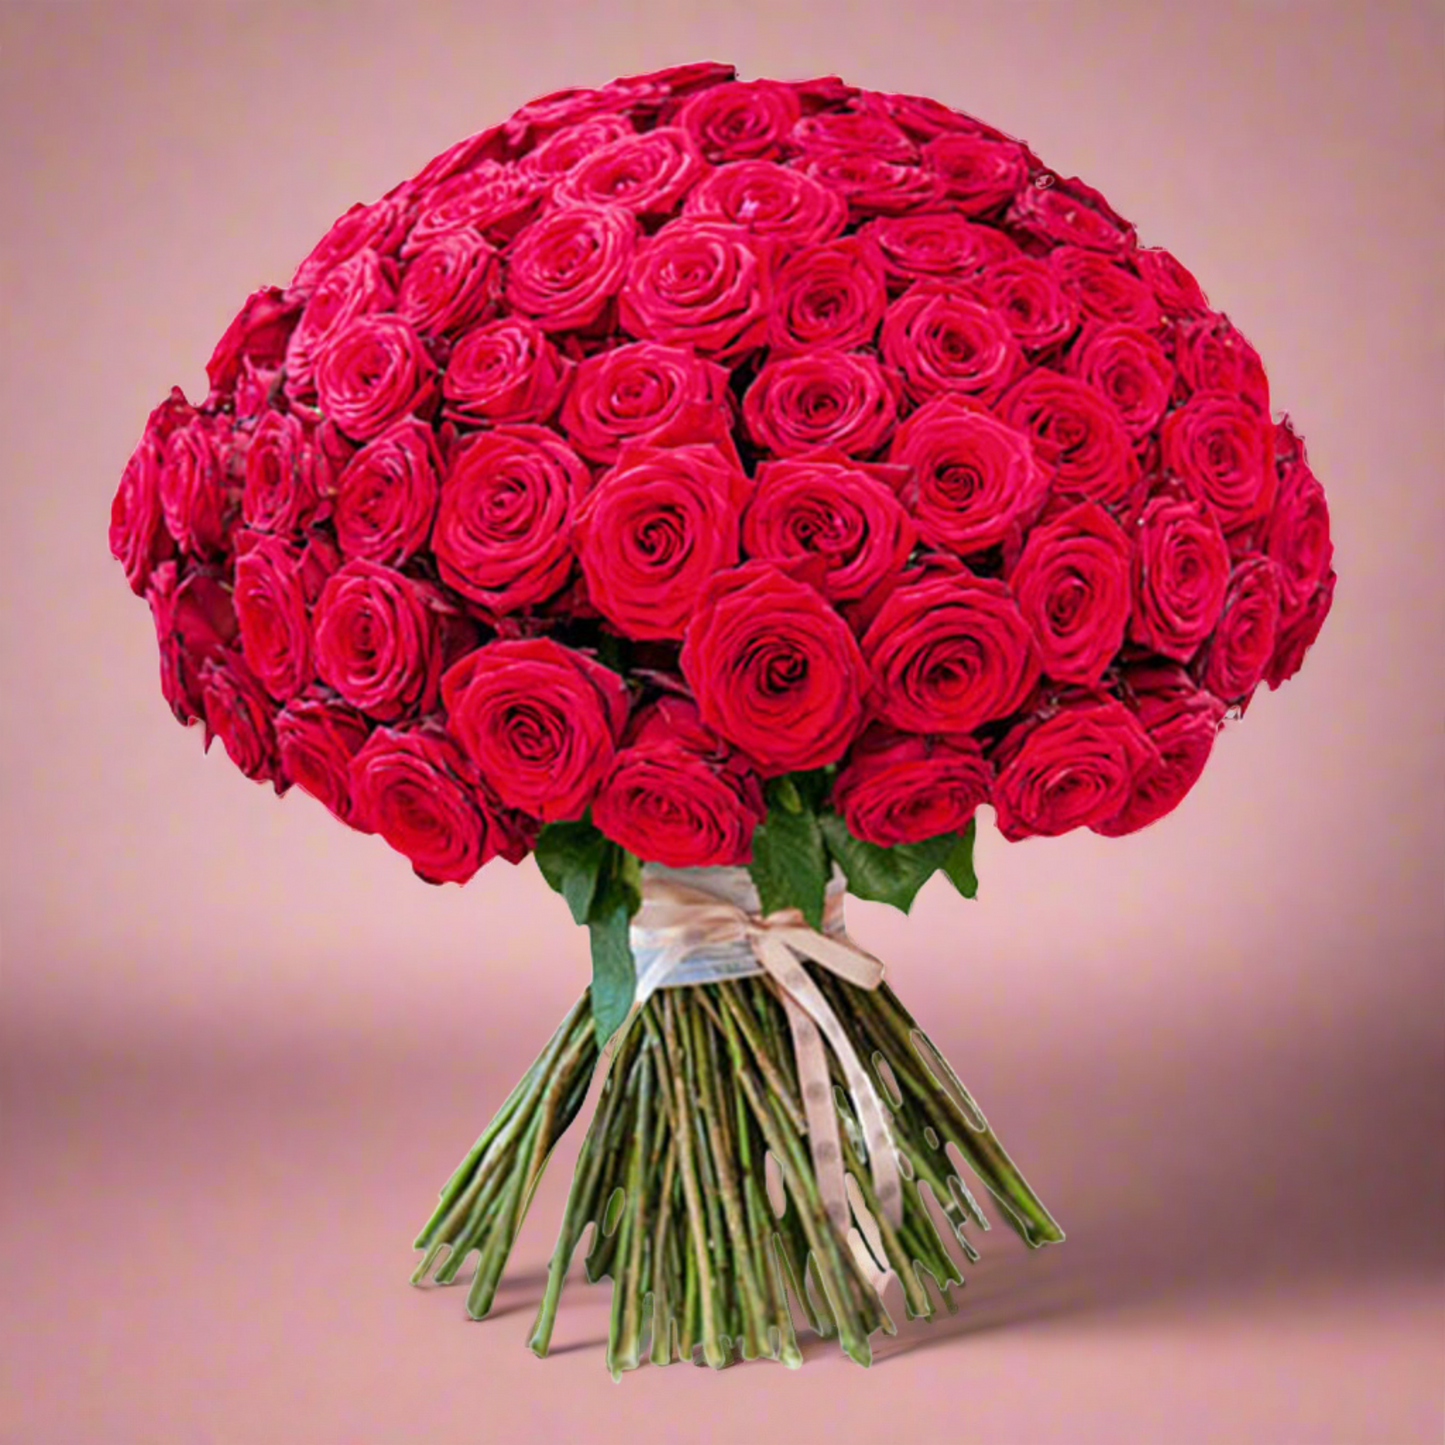 The 100 Roses Bouquet